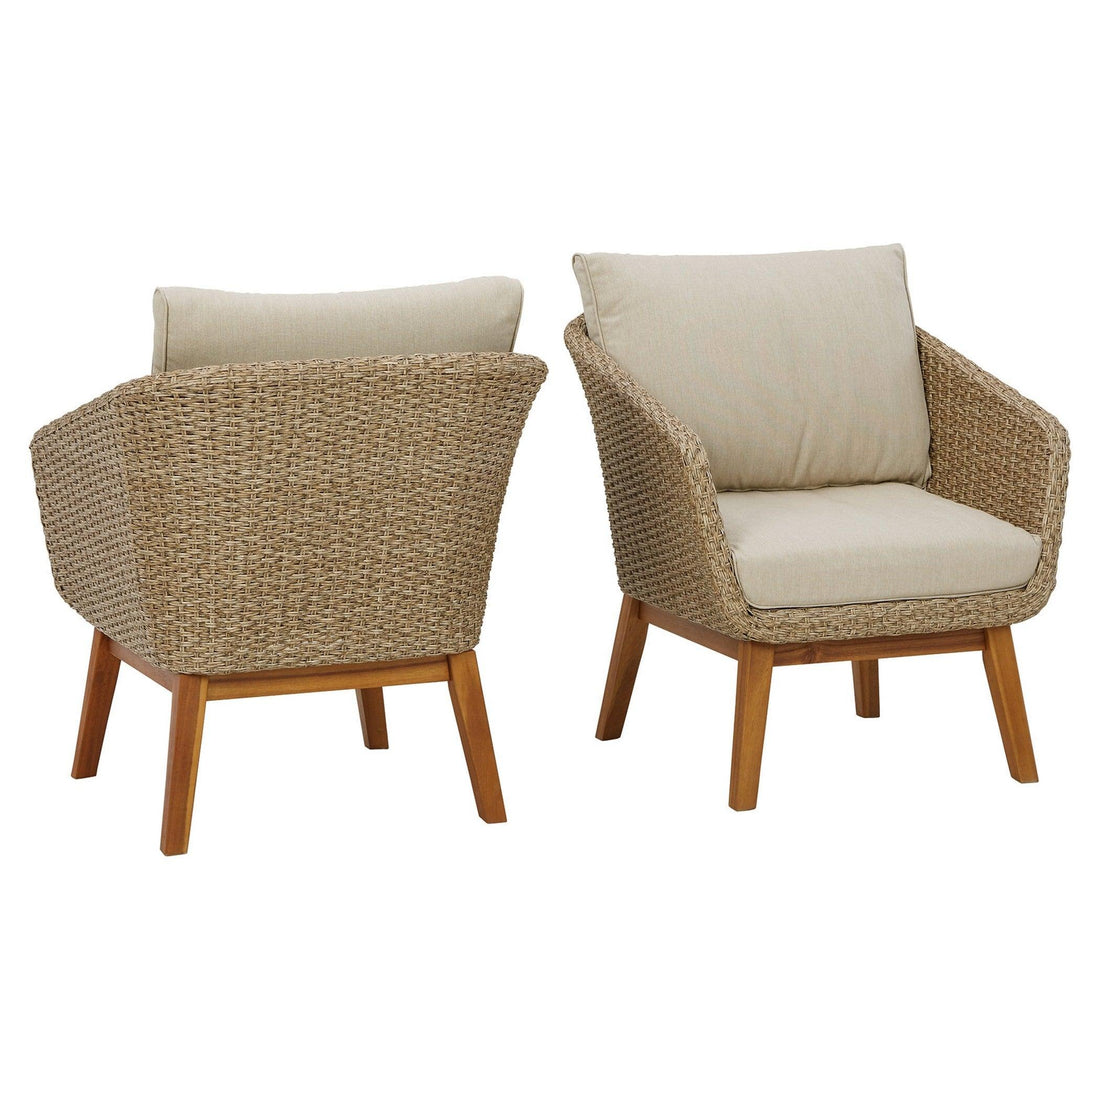 Crystal Cave Outdoor Lounge Chair with Cushion (Set of 2) Ash-P350-820